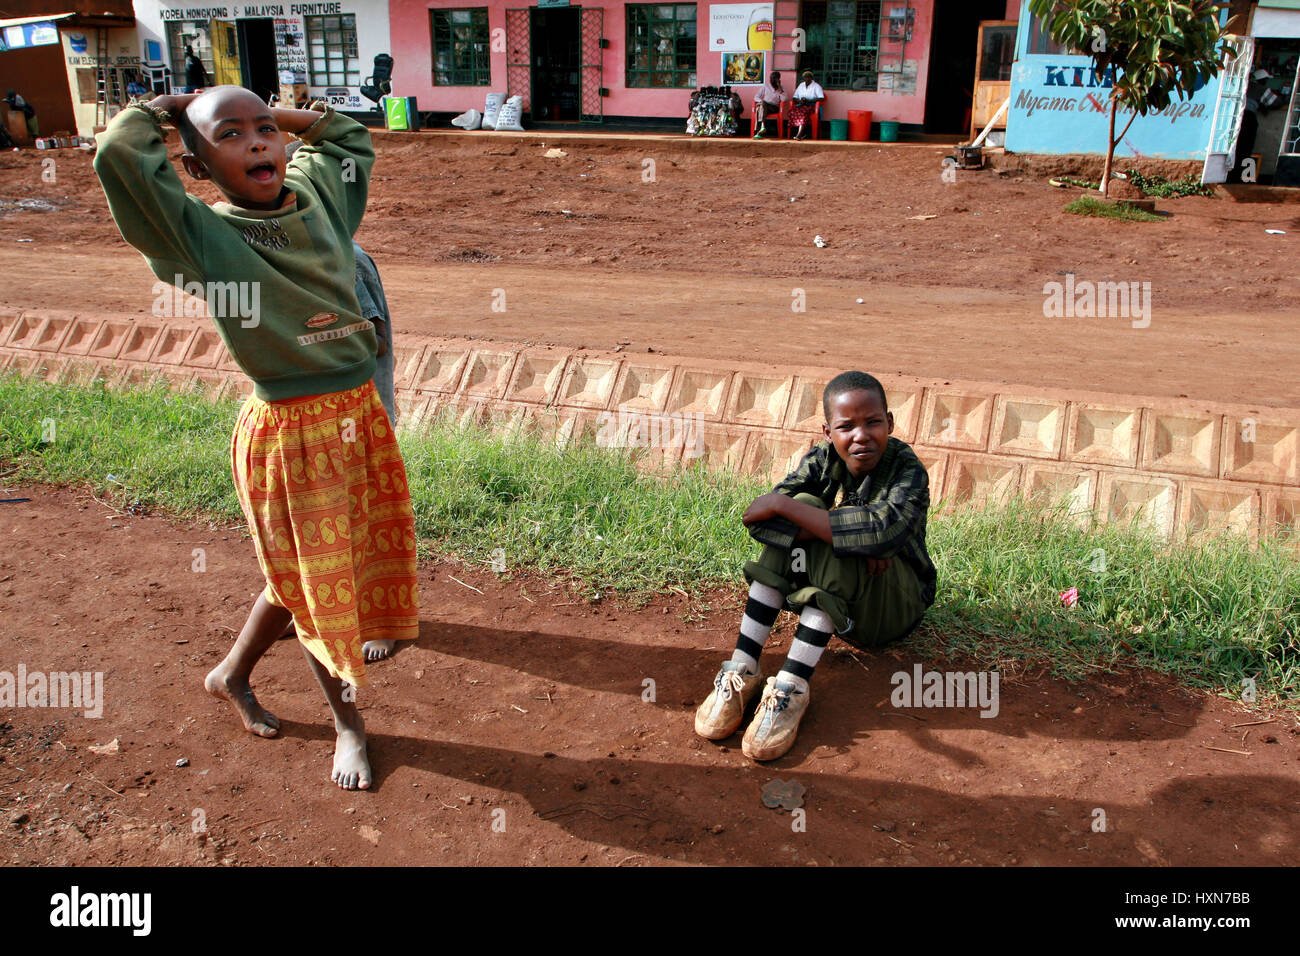 Makuyuni, Arusha, Tanzania - February 13, 2008: Unidentified African children, two unknown black girls, the approximate age of 10 years old, resting o Stock Photo